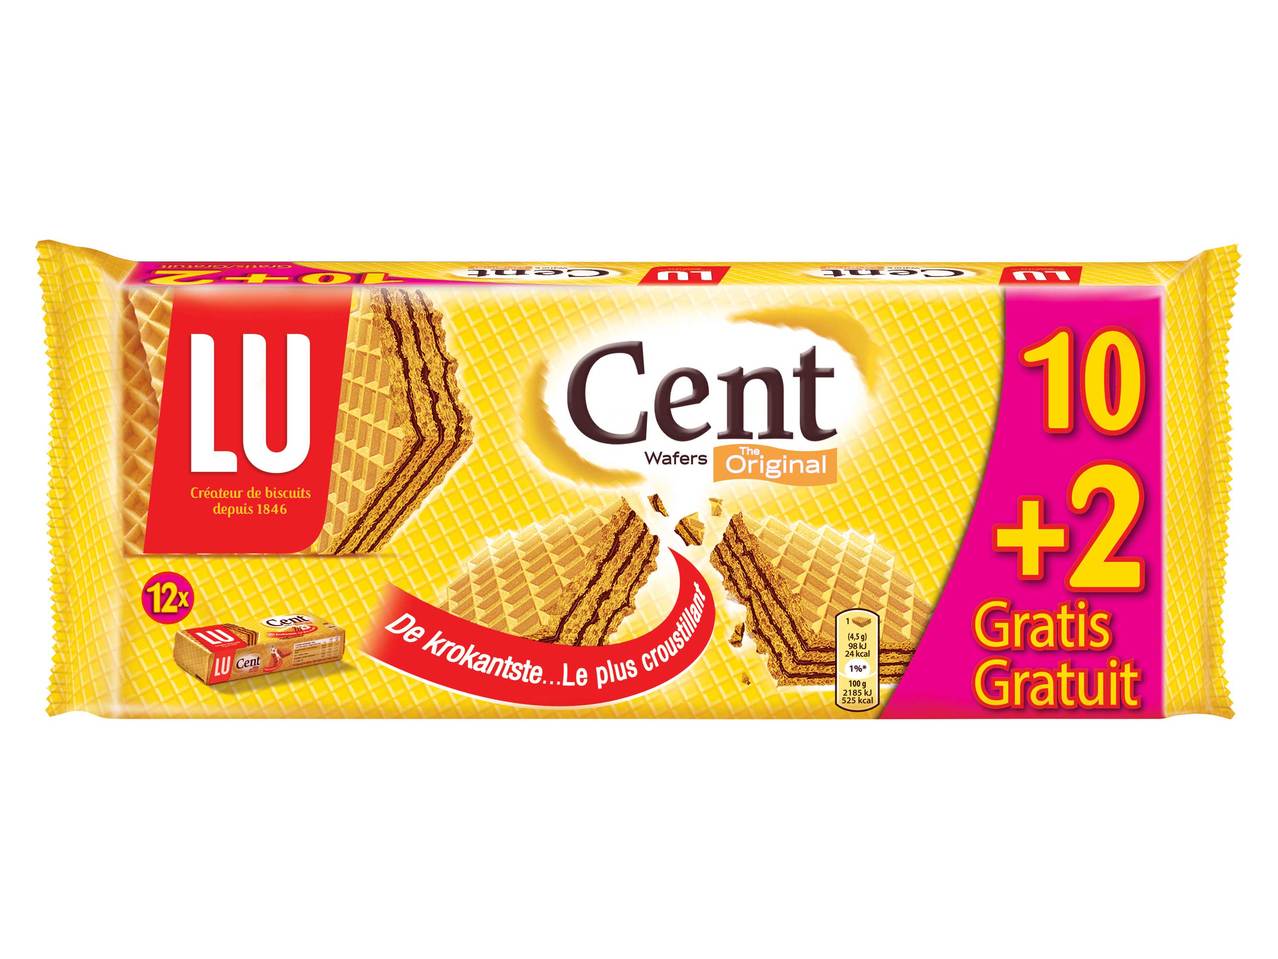 Cent Wafers